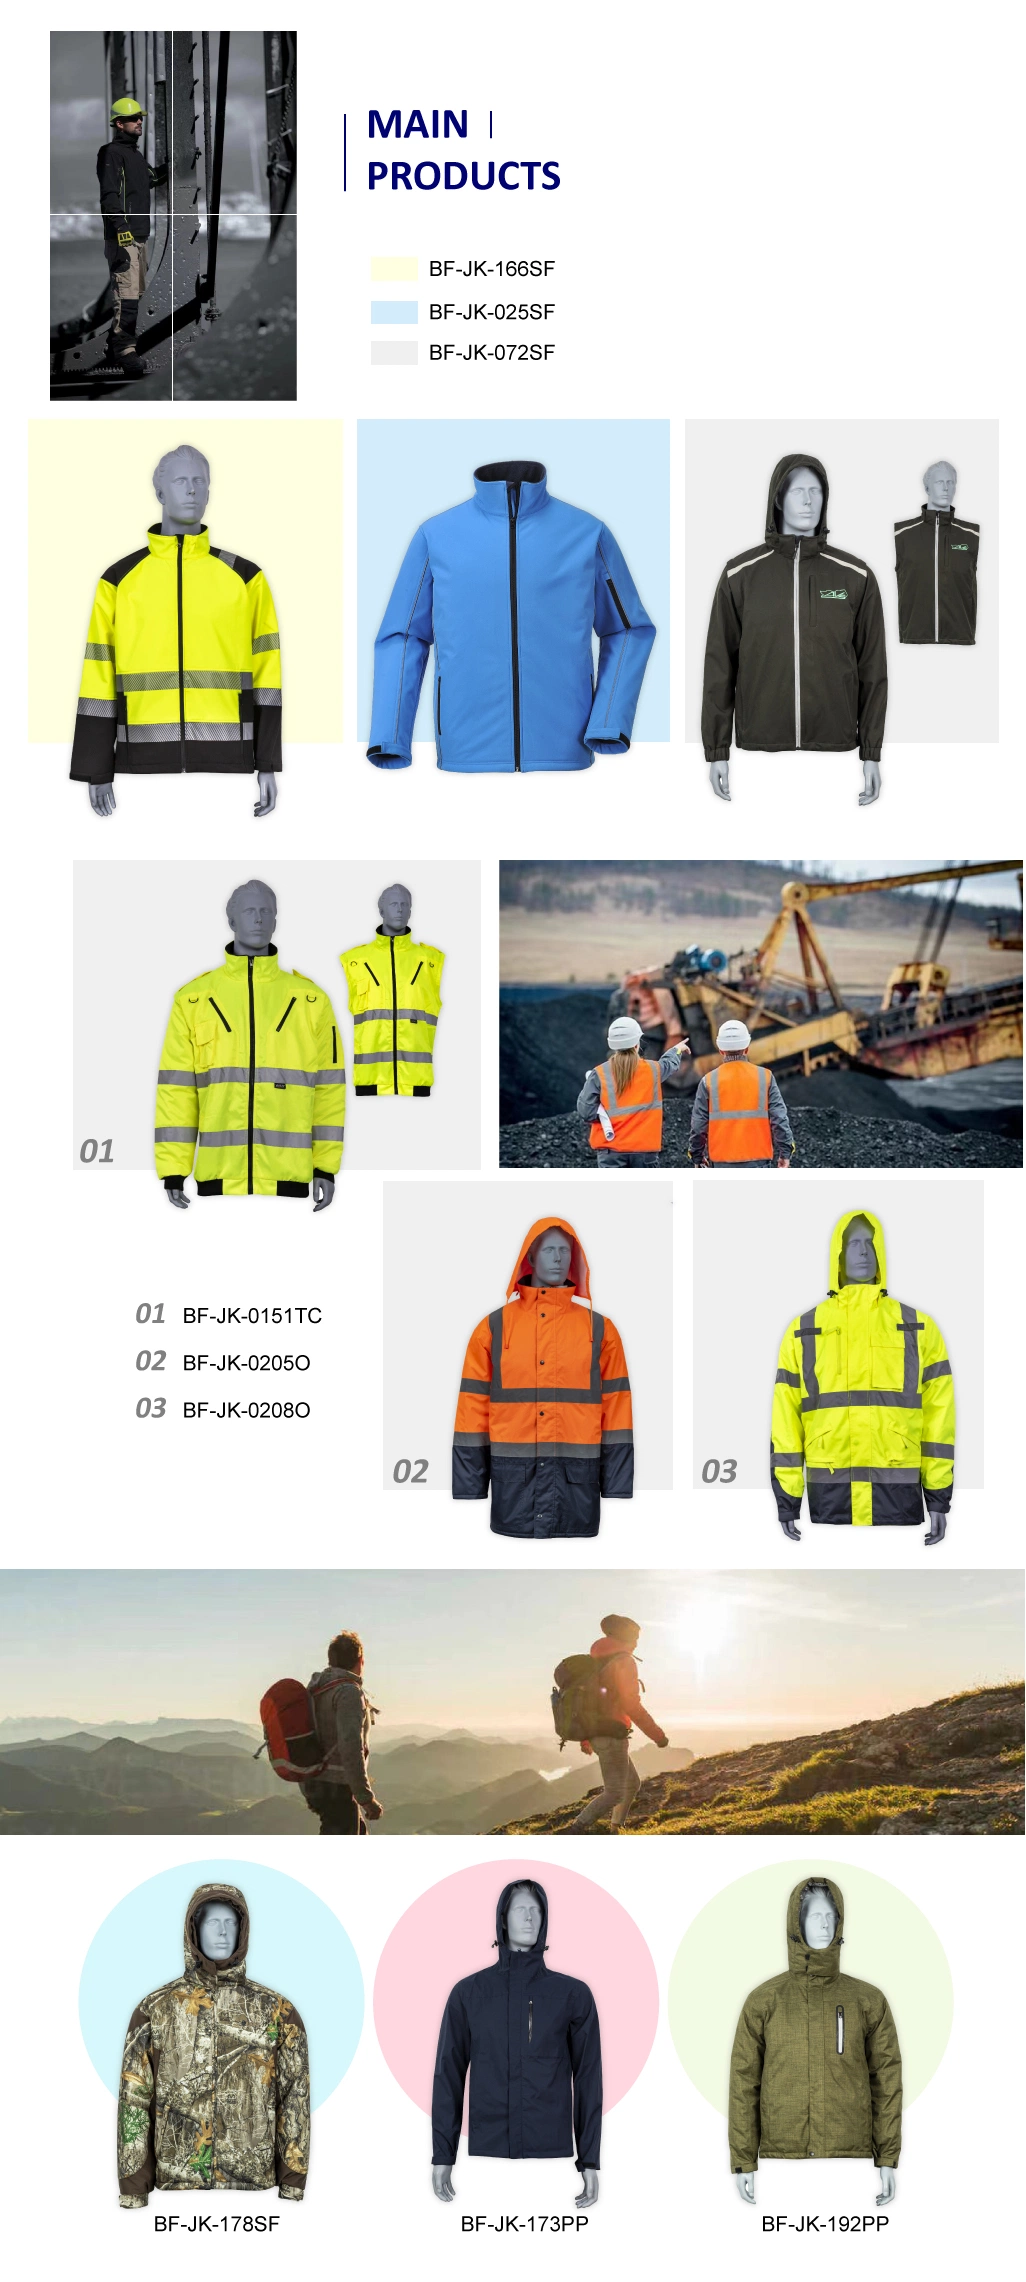 Hi Vis Rainproof Waterproof Windproof Breathable Outdoor Sport Claiming Hiking Outerwear High Soft Stretched Fabric Hooded Full Seam Taped Parka Jacket